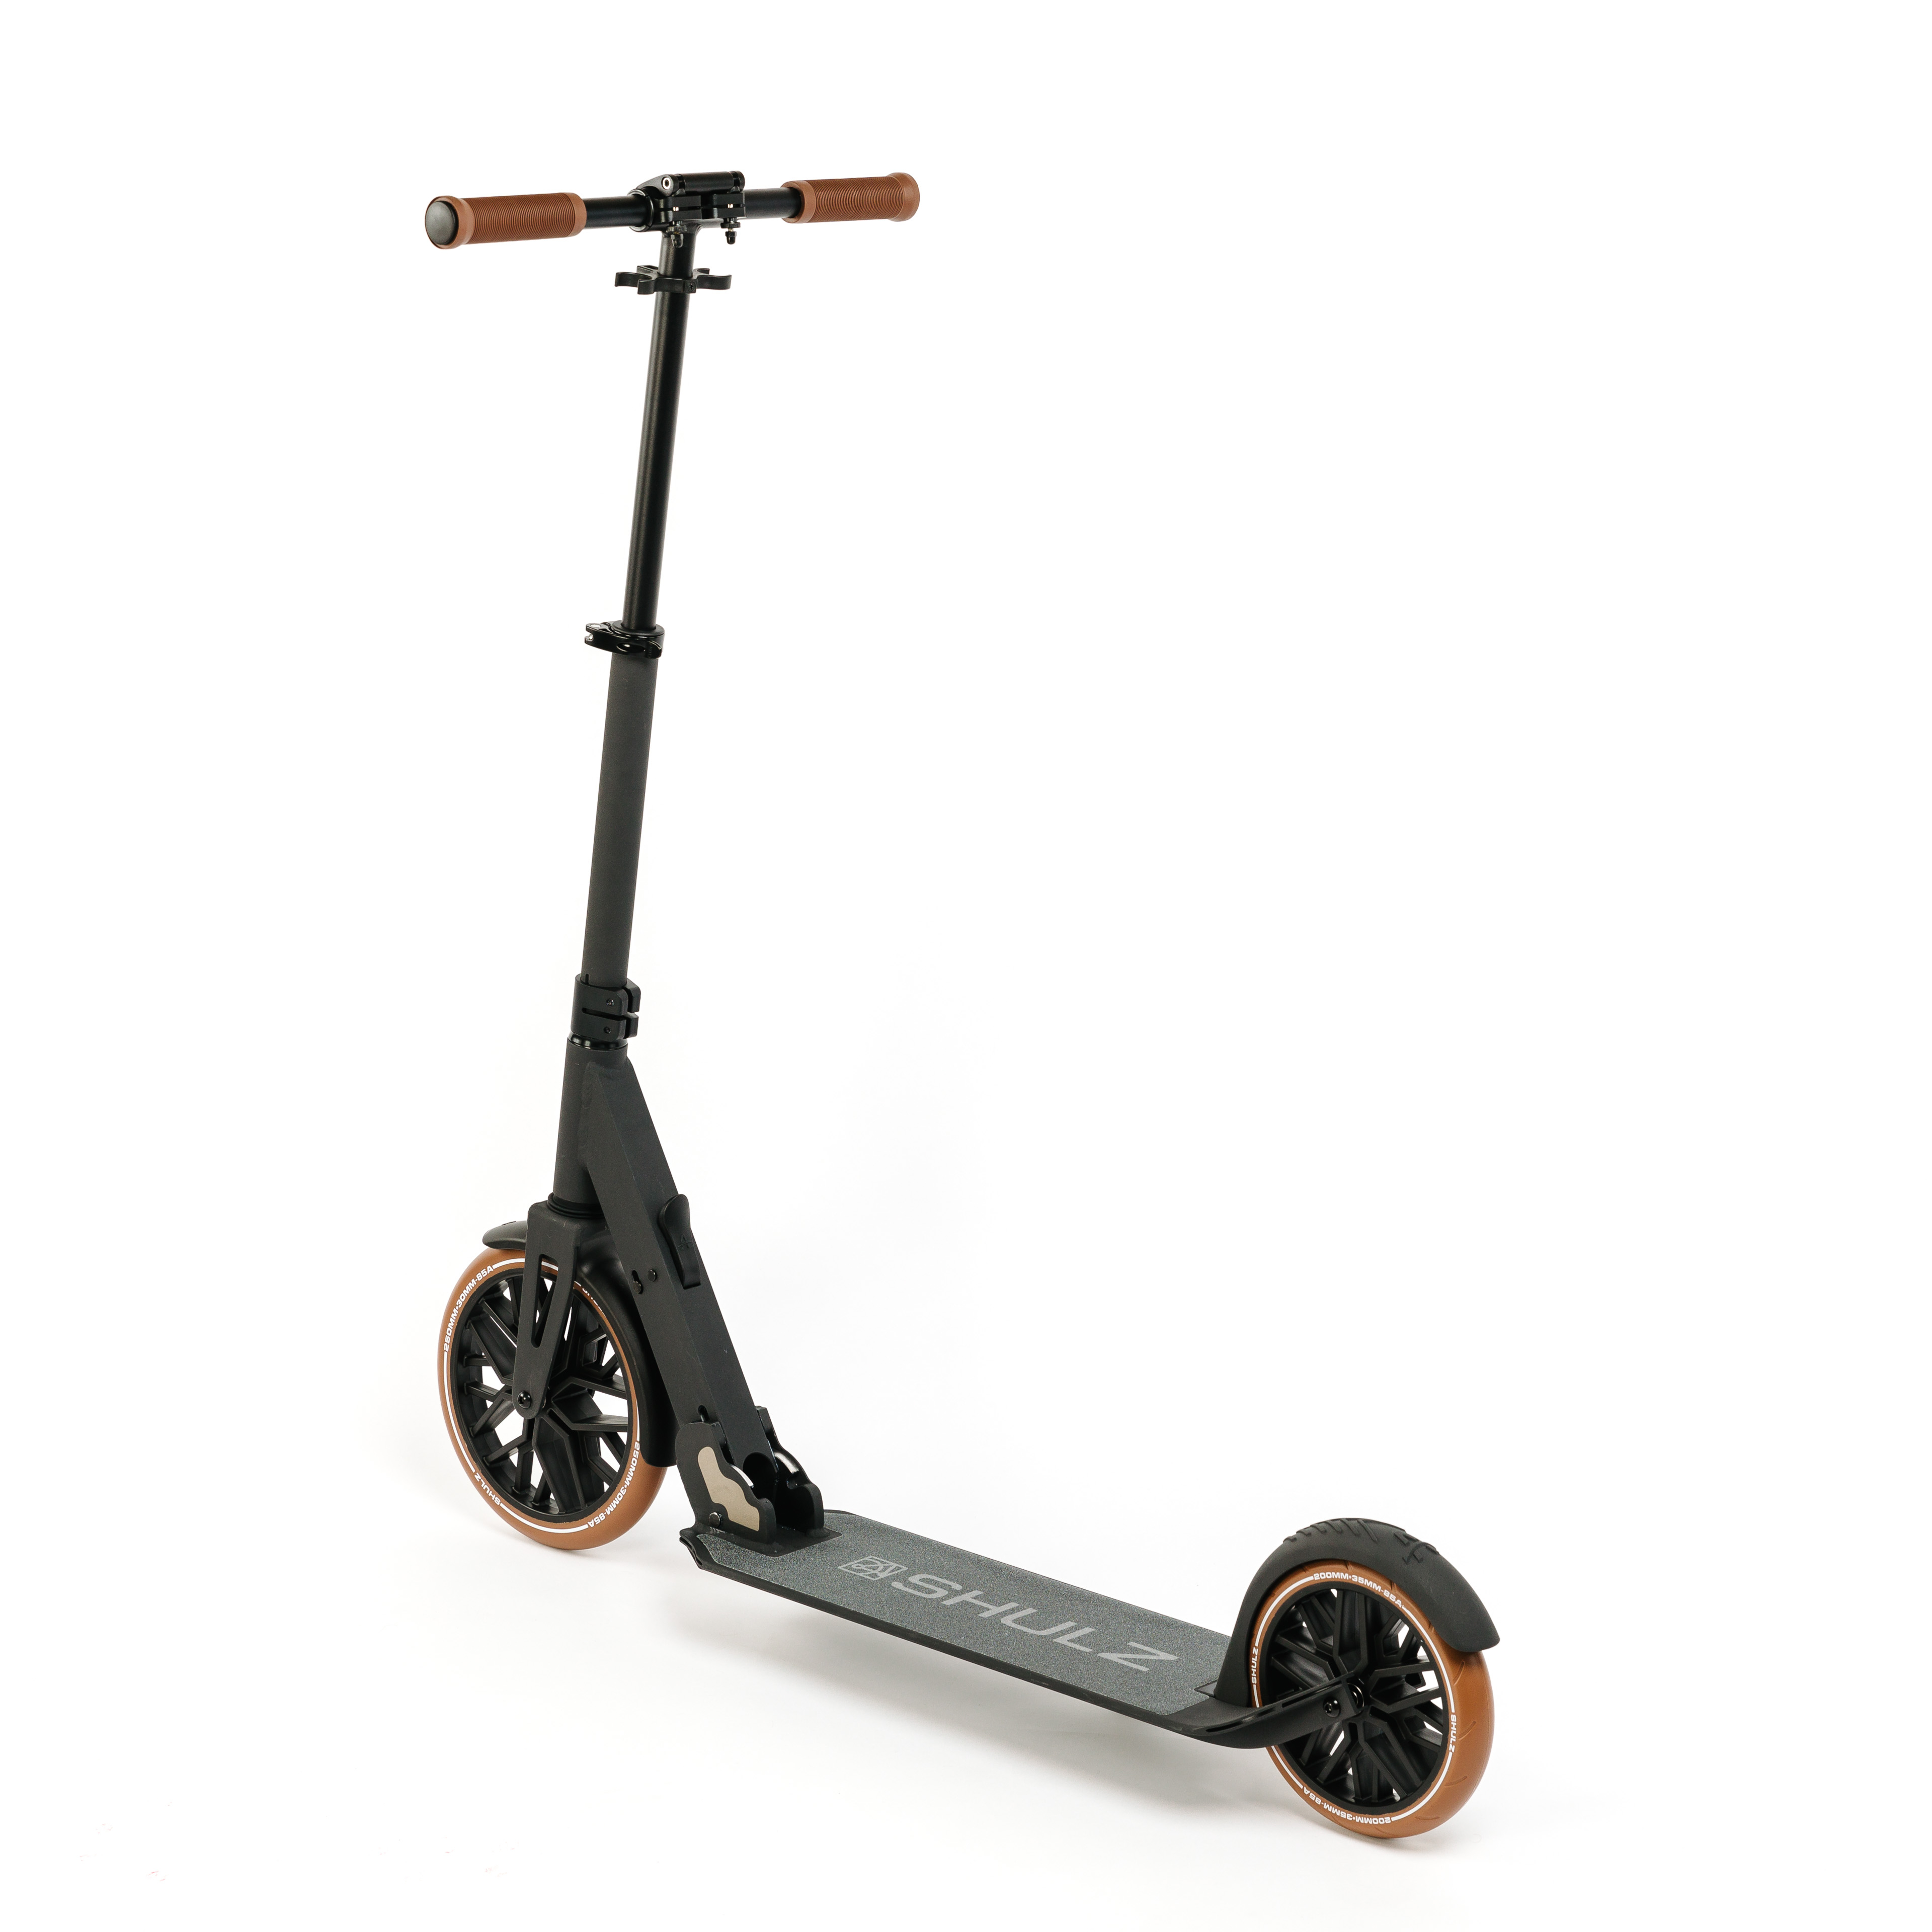 Shulz 250 Speed Scooter